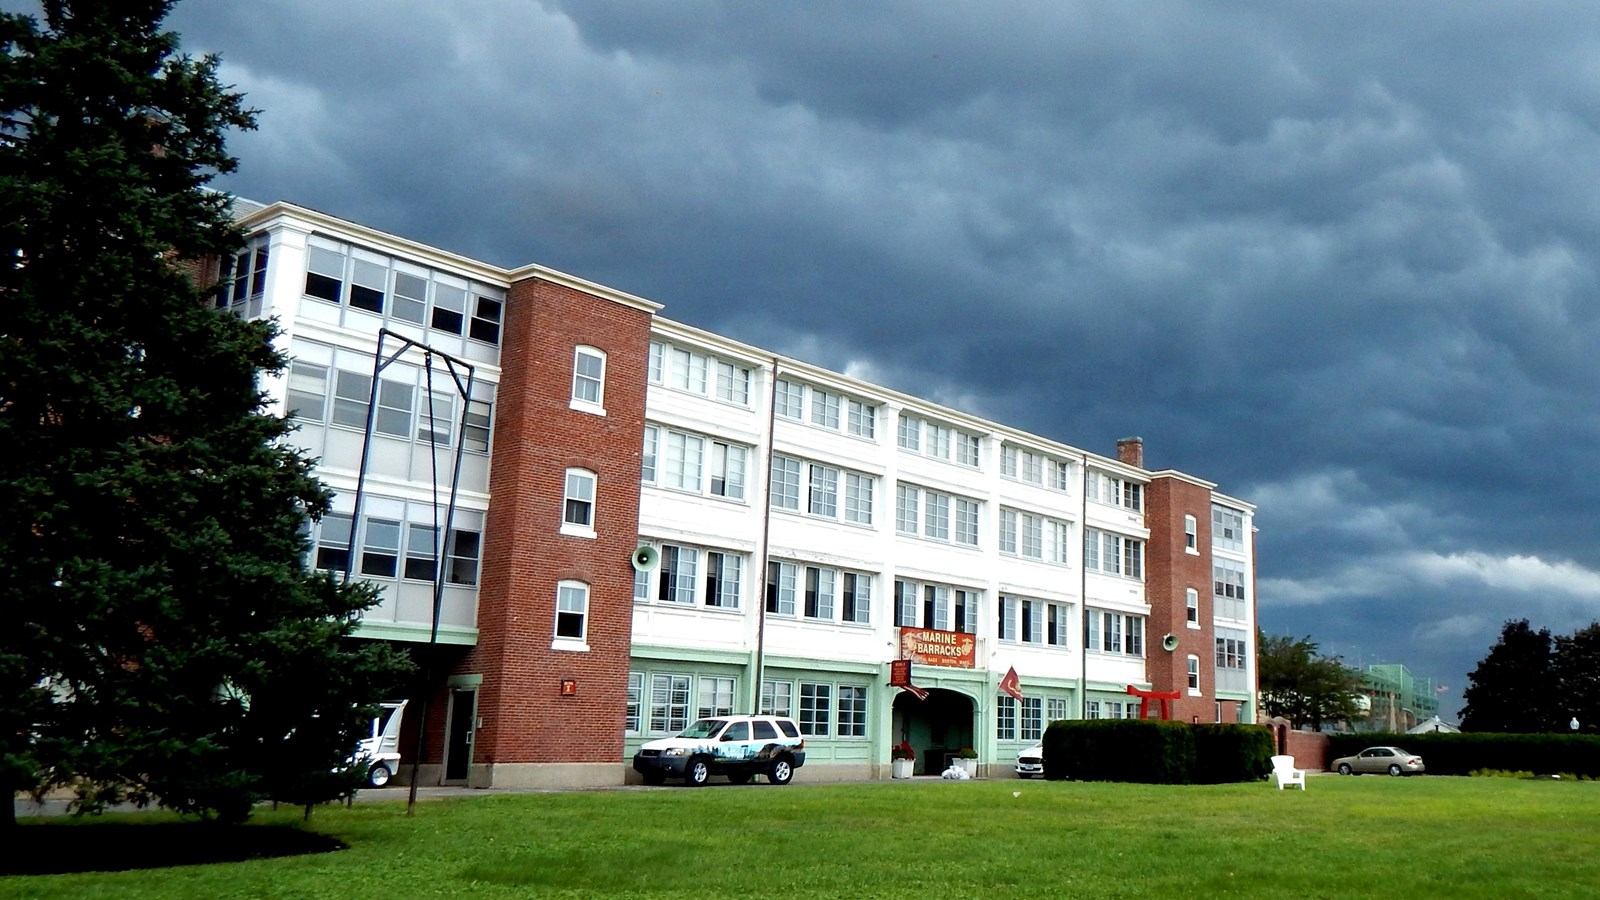 Cloud-filled sky over the Marine Barracks, a four-story building with a grassy field in front.